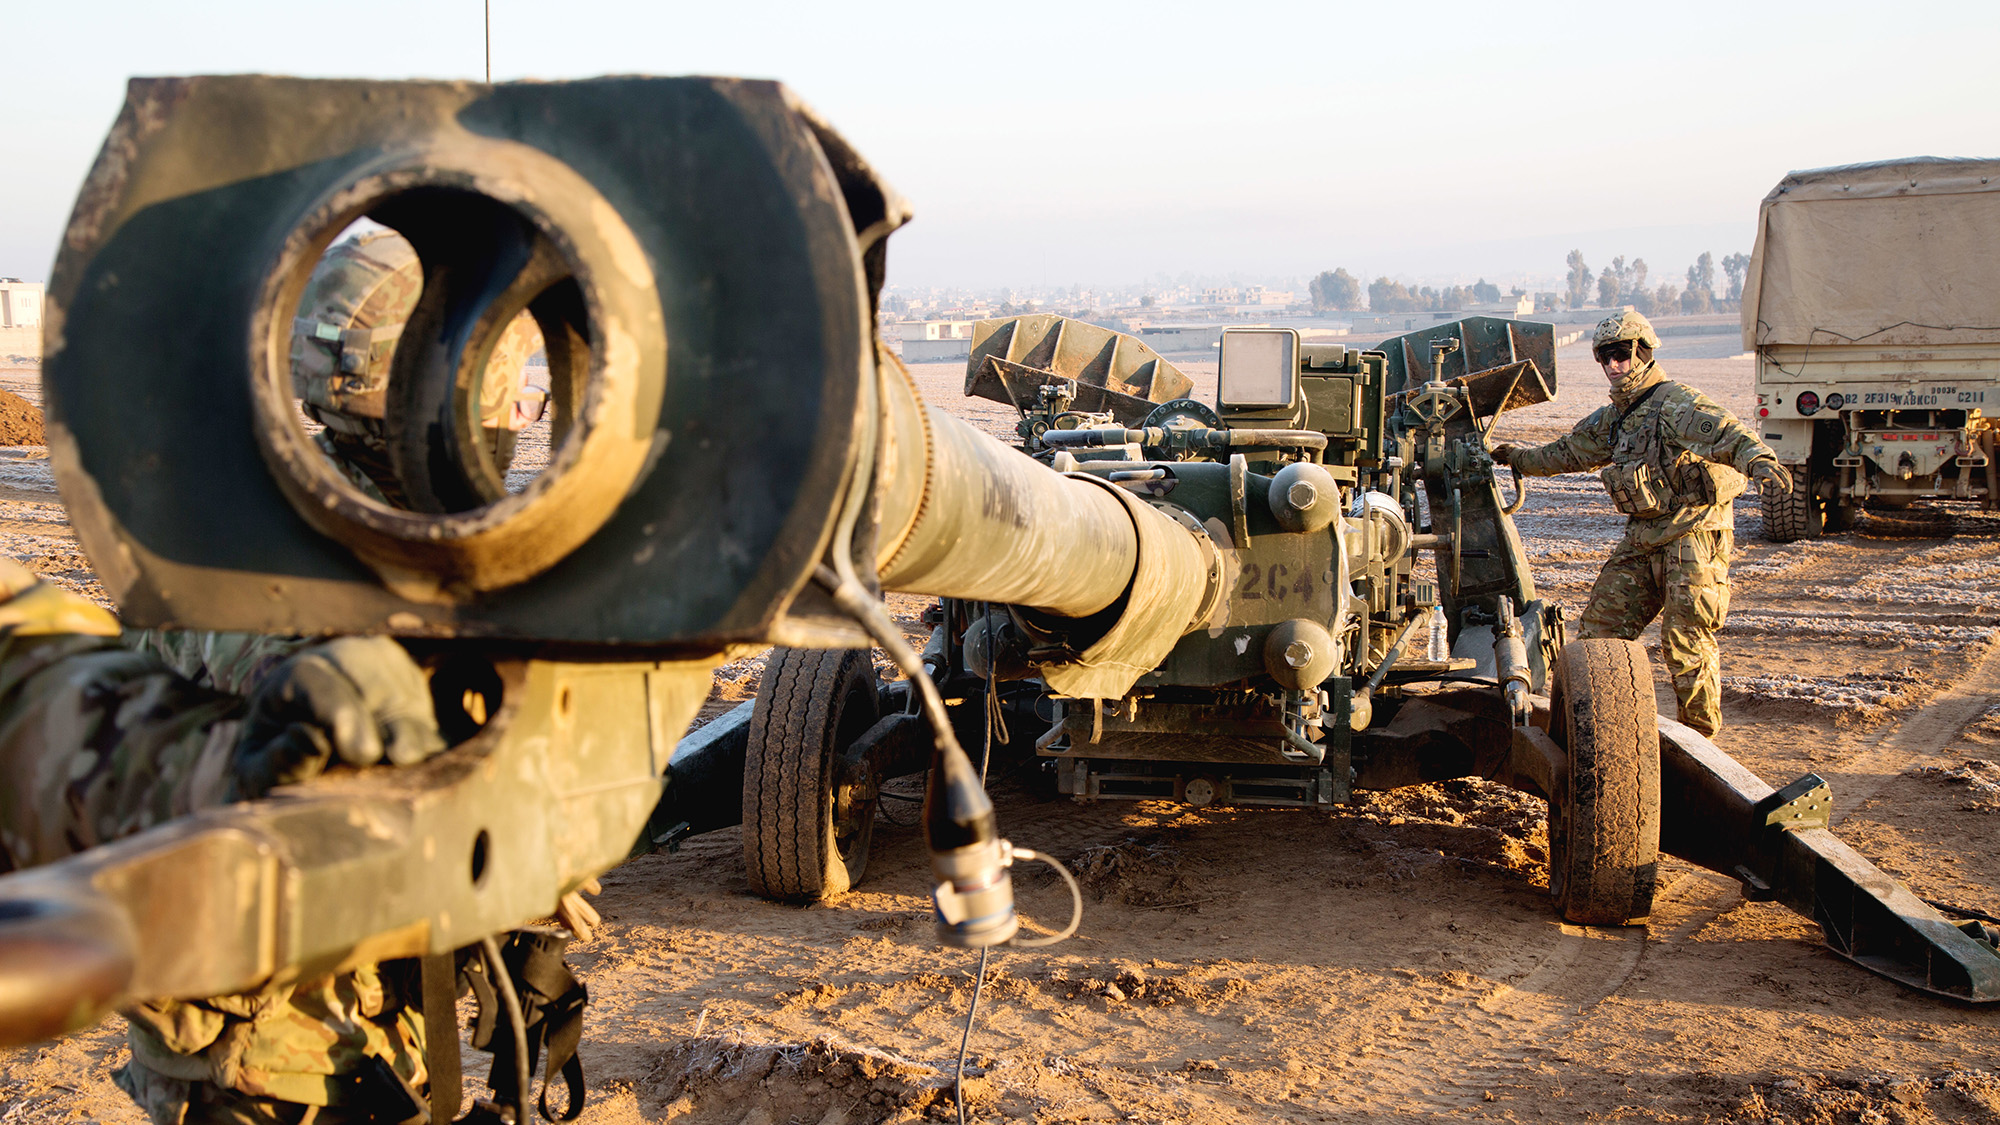 A M777 towed 155 mm howitzer is placed in its firing position near Mosul, Iraq on February 3, 2017.